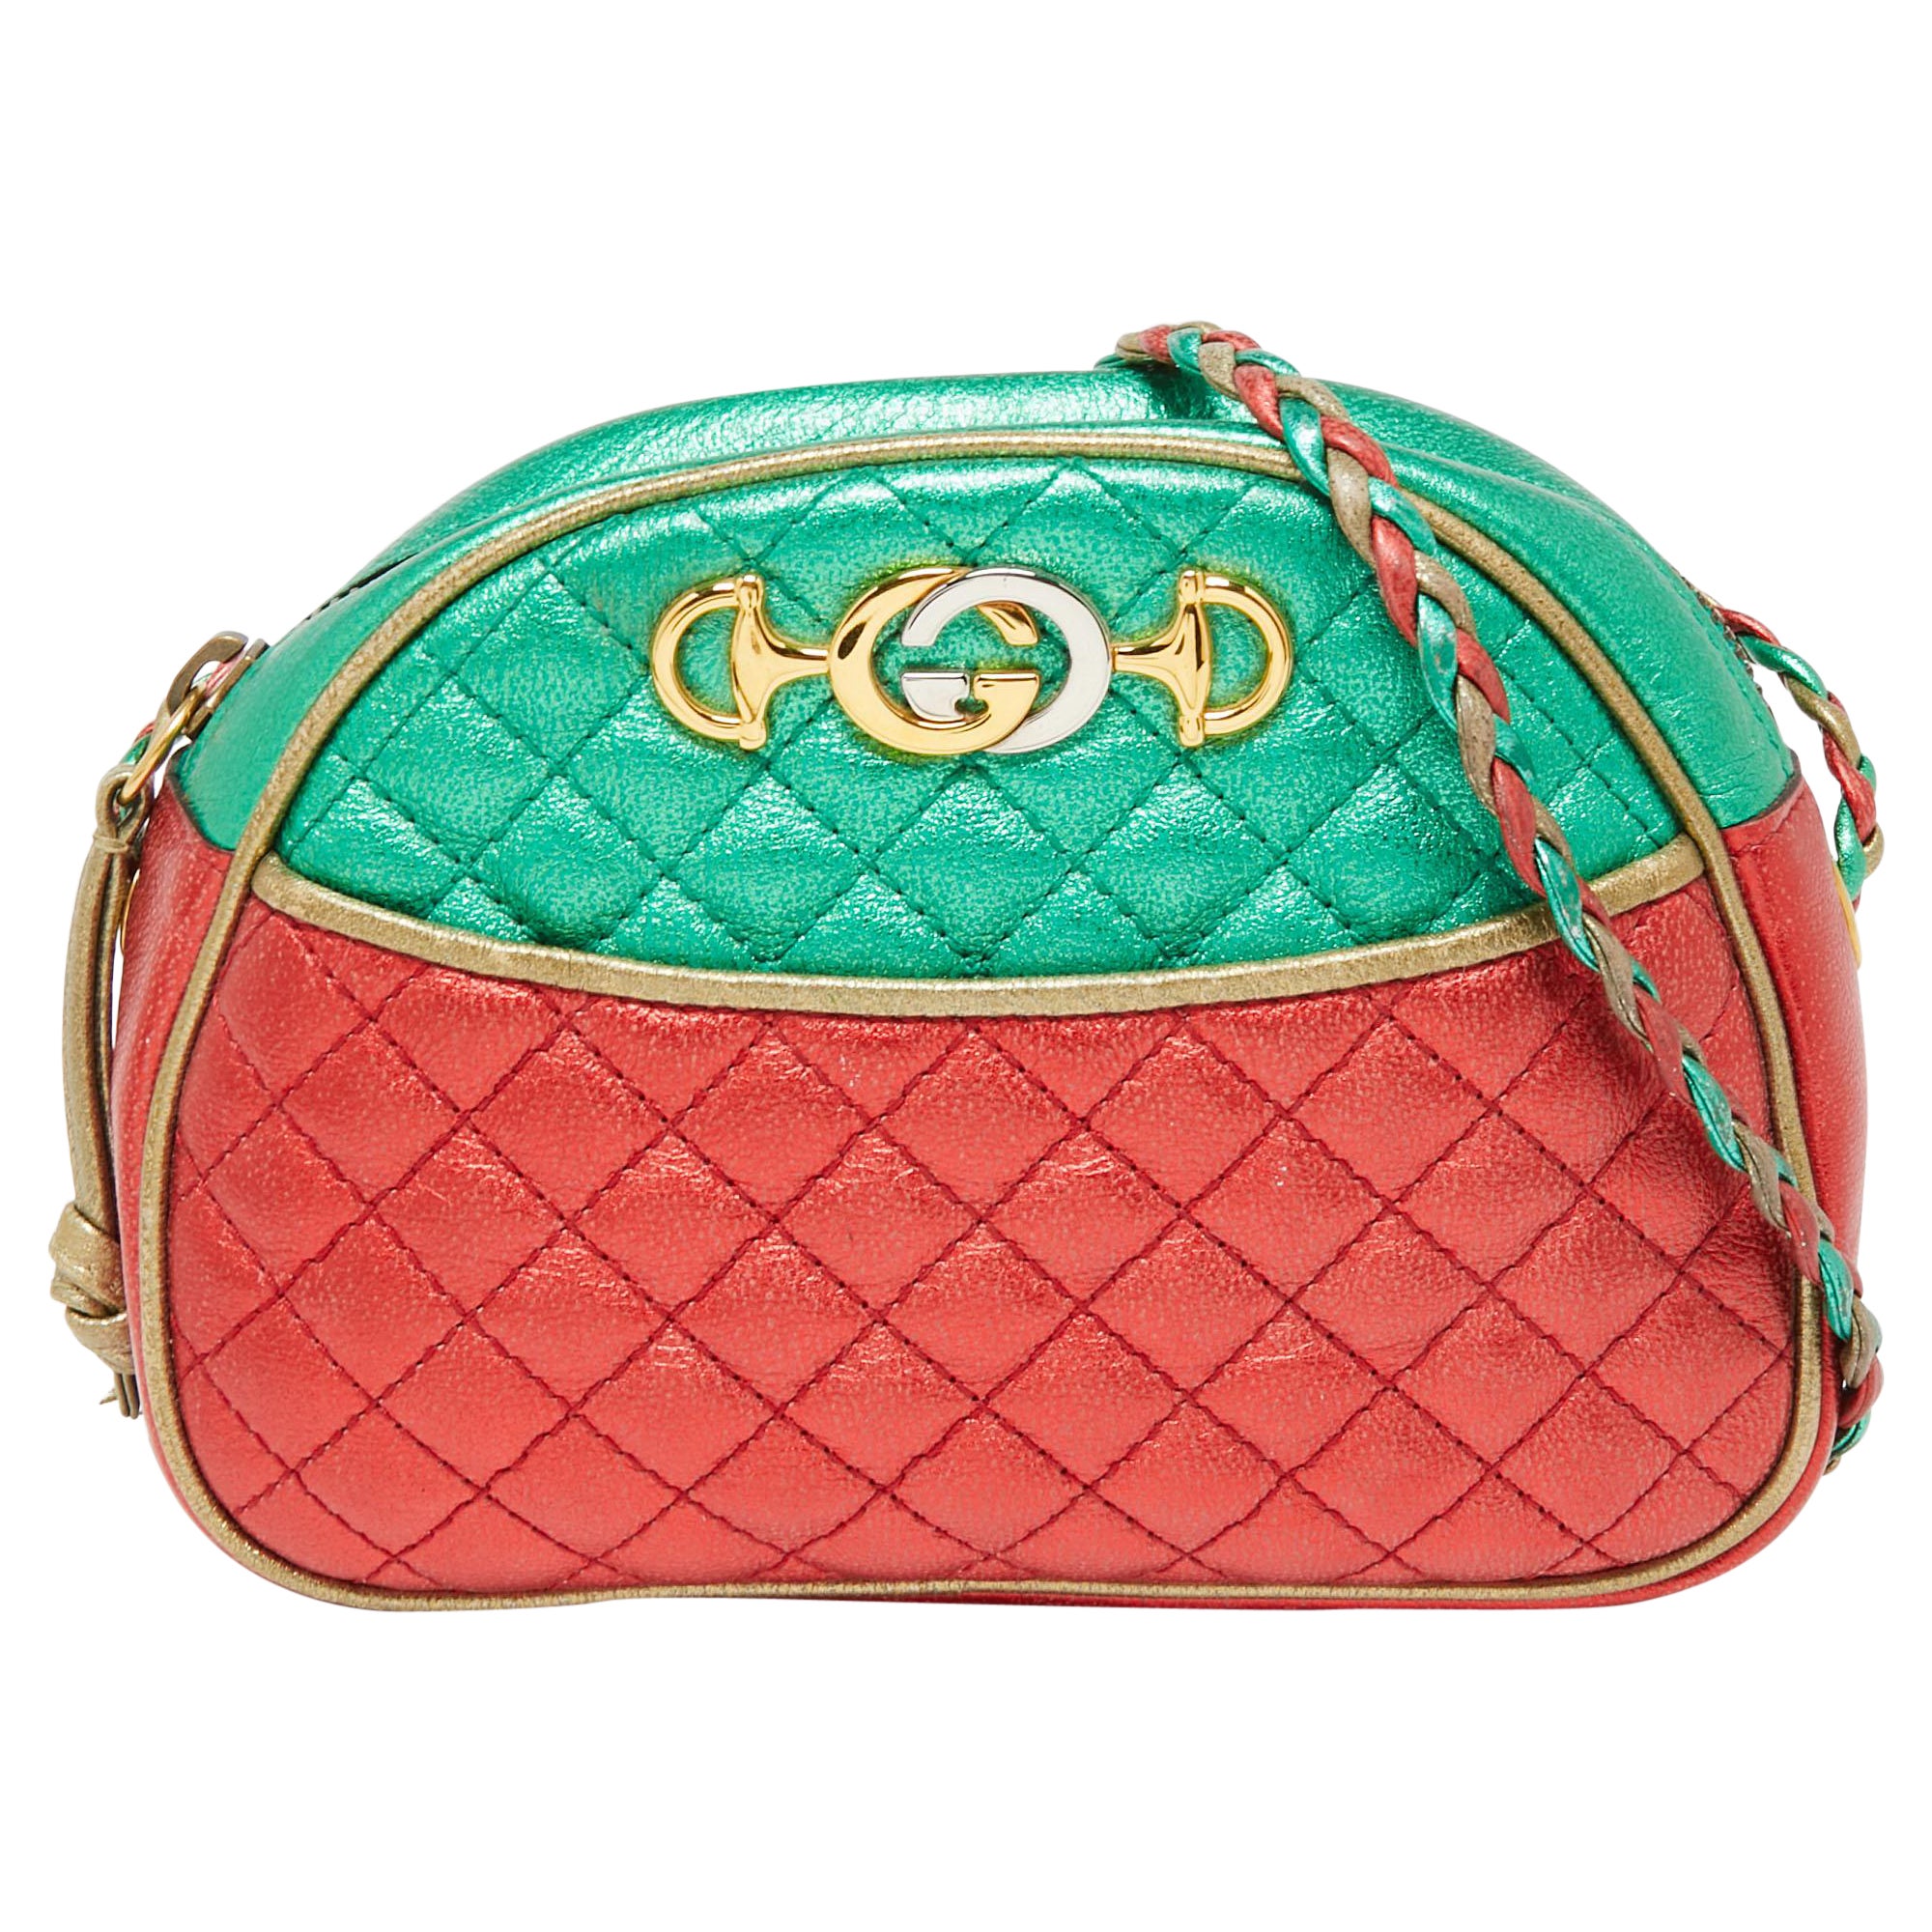 Gucci Multicolor Quilted Leather Mini Trapuntata Crossbody Bag at